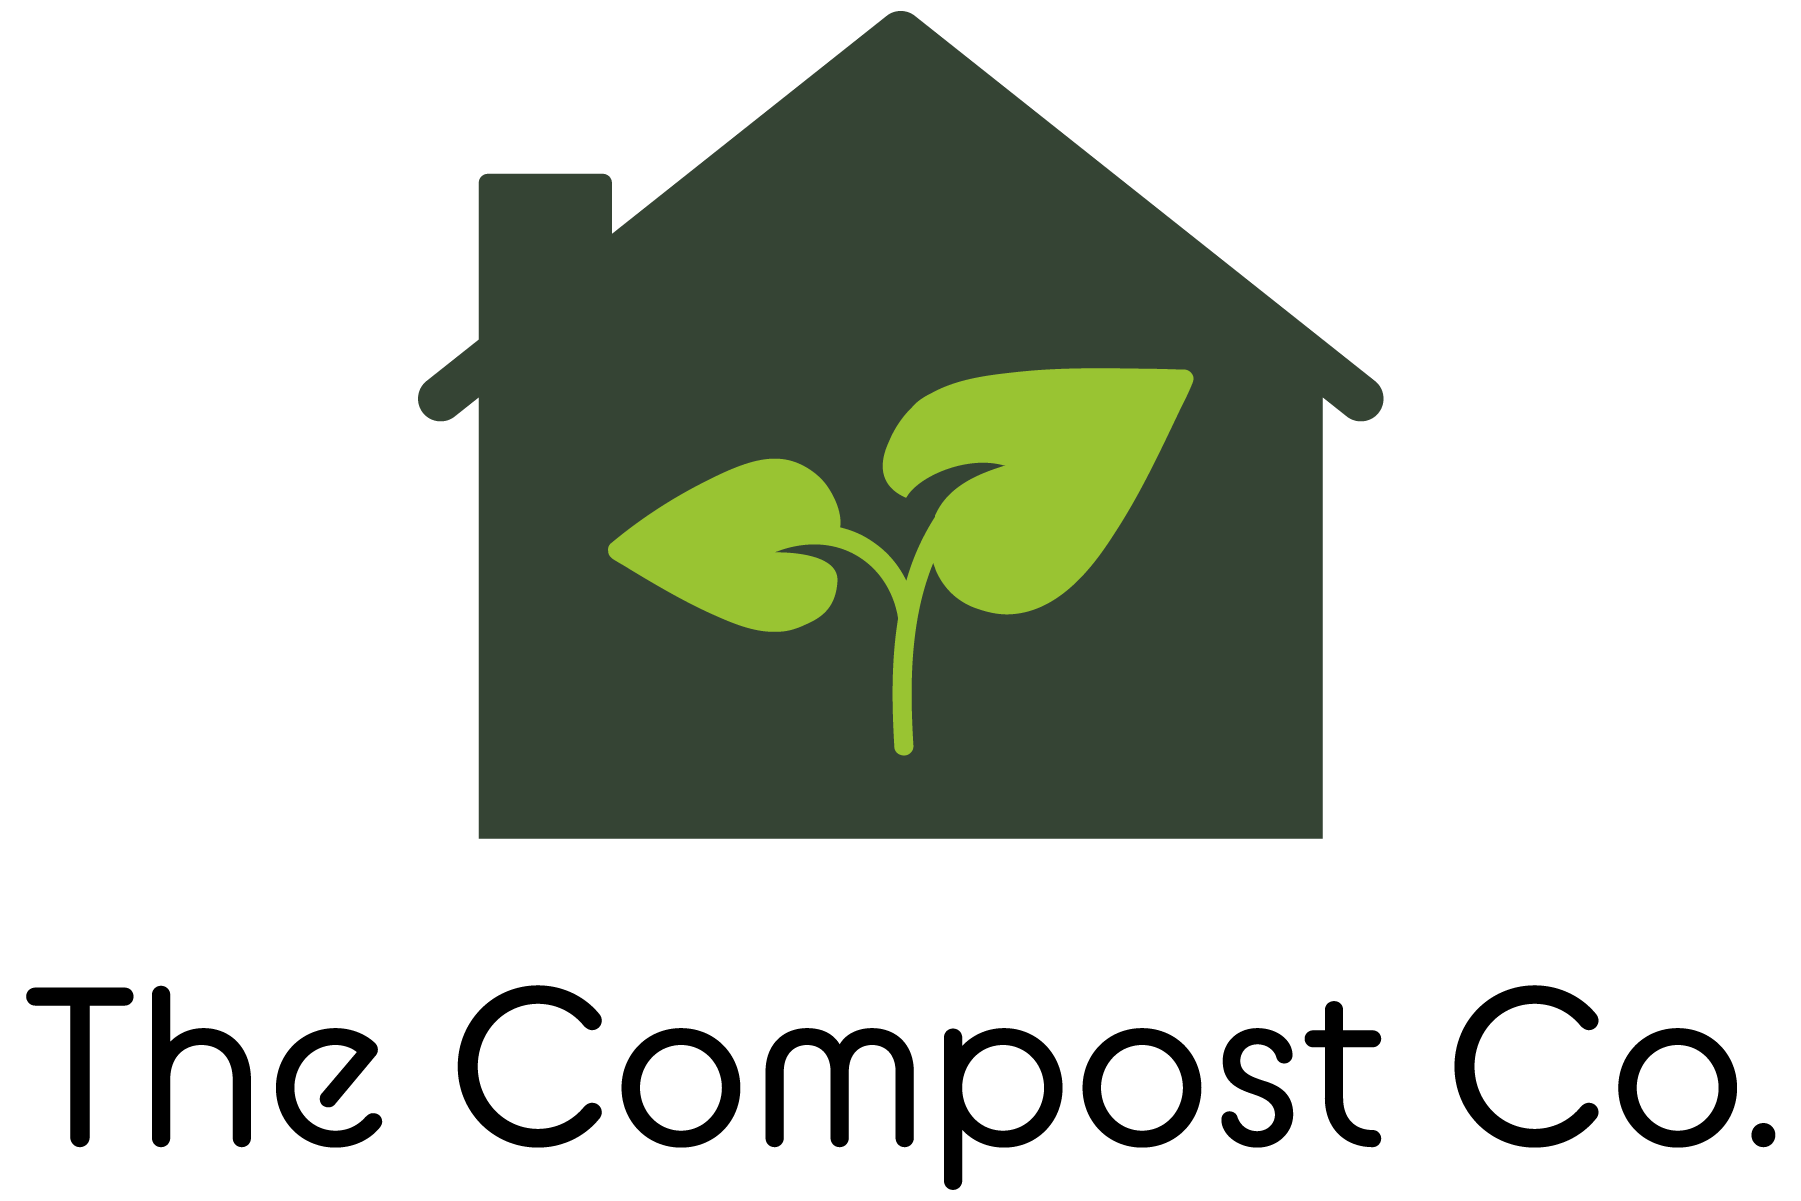 The Compost Co